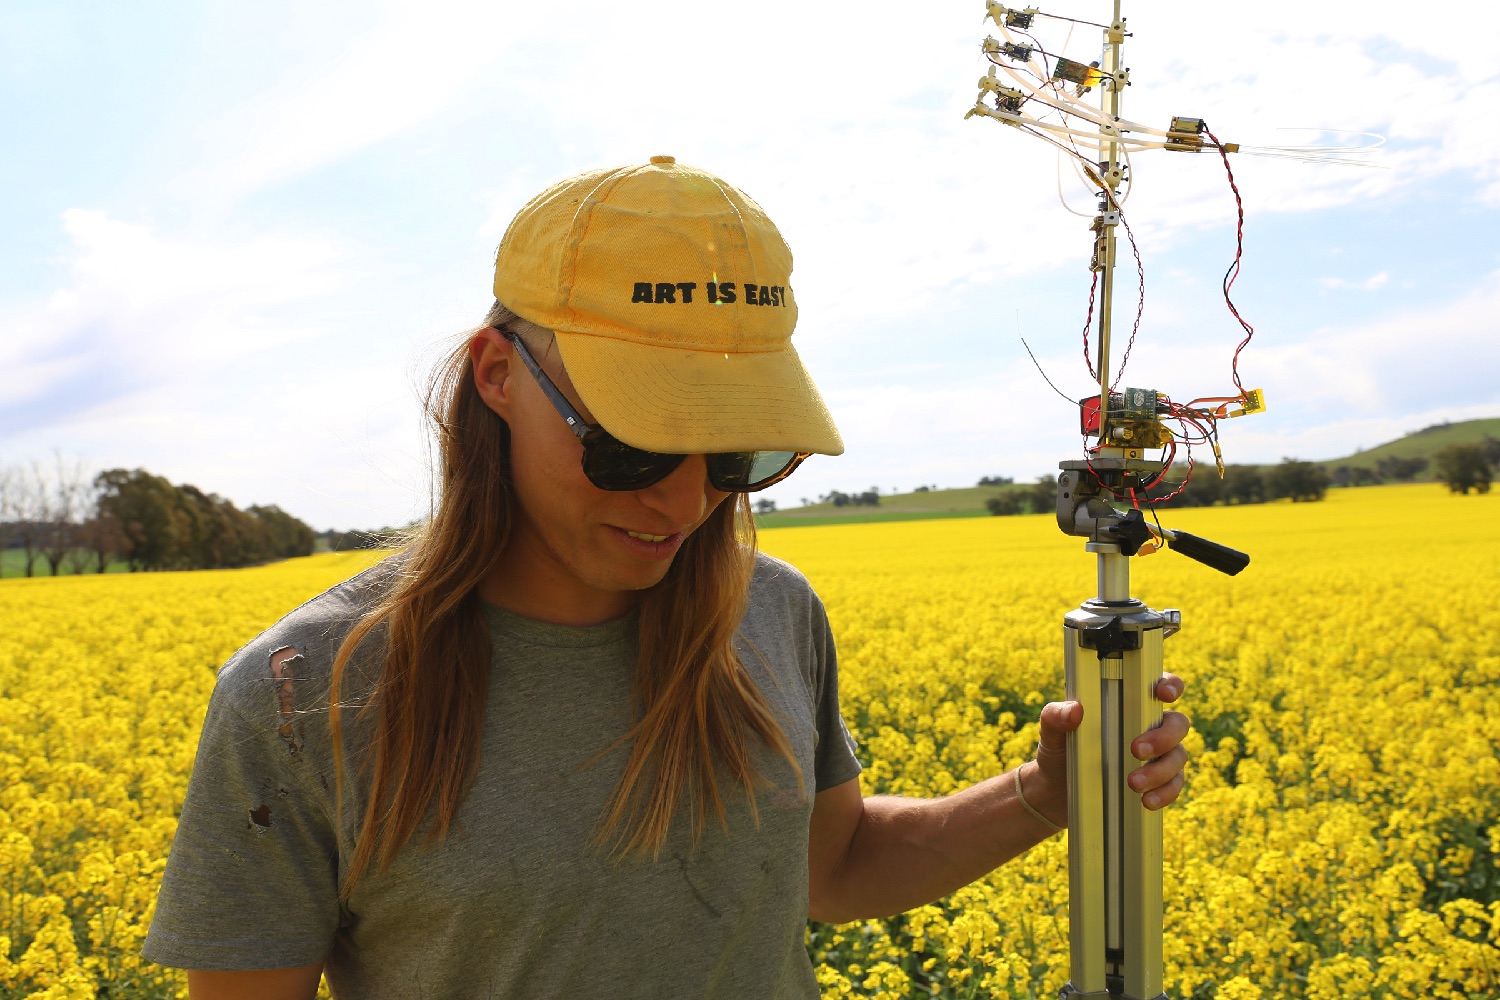 bee attracting robo flower michael candy field tests  image by sarah werkmeister